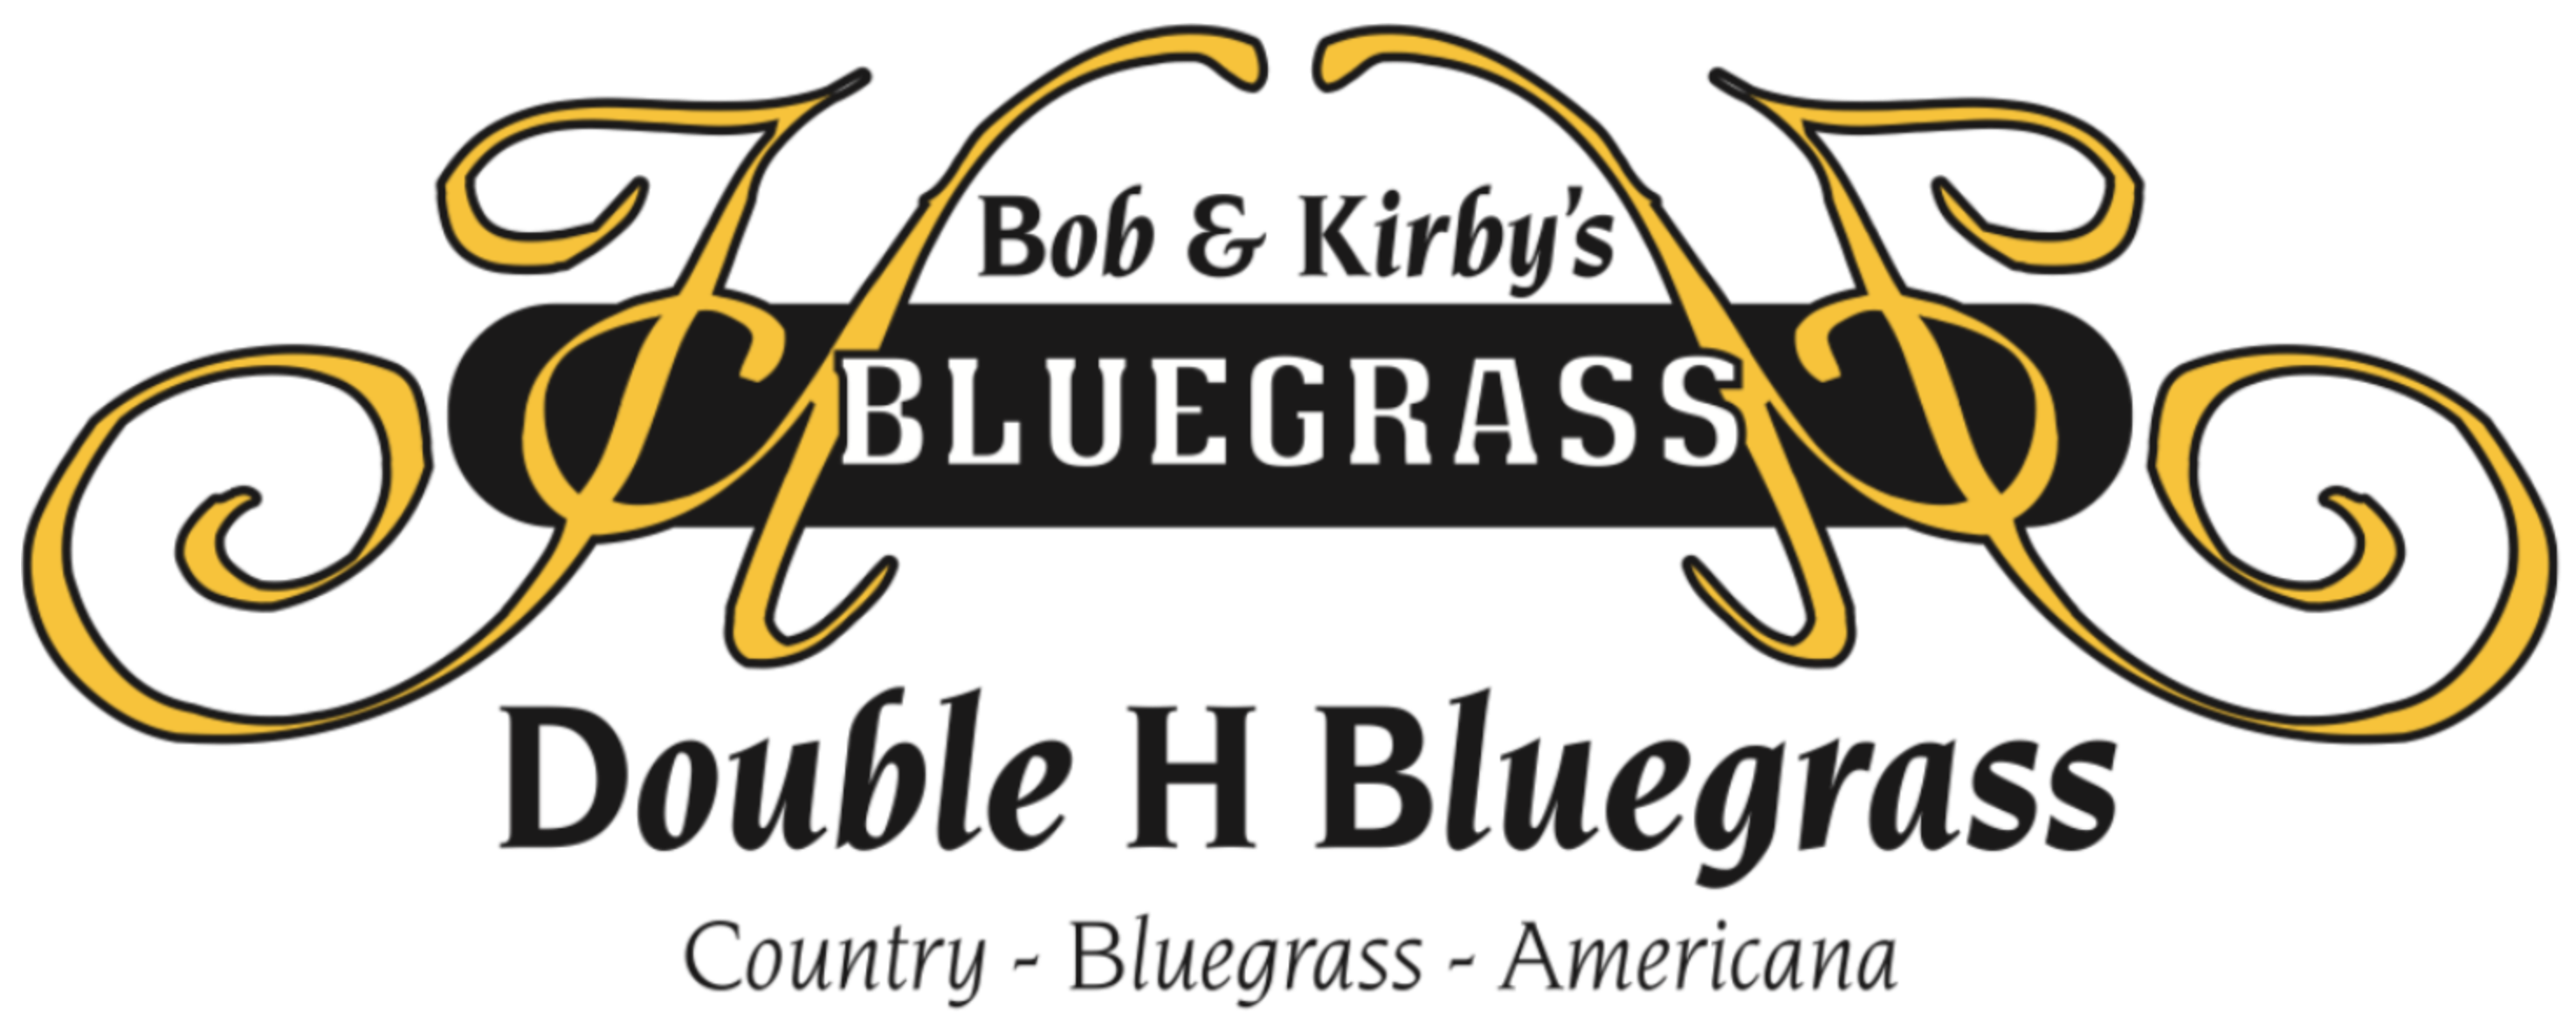 Bob and Kirby's Double H Bluegrass